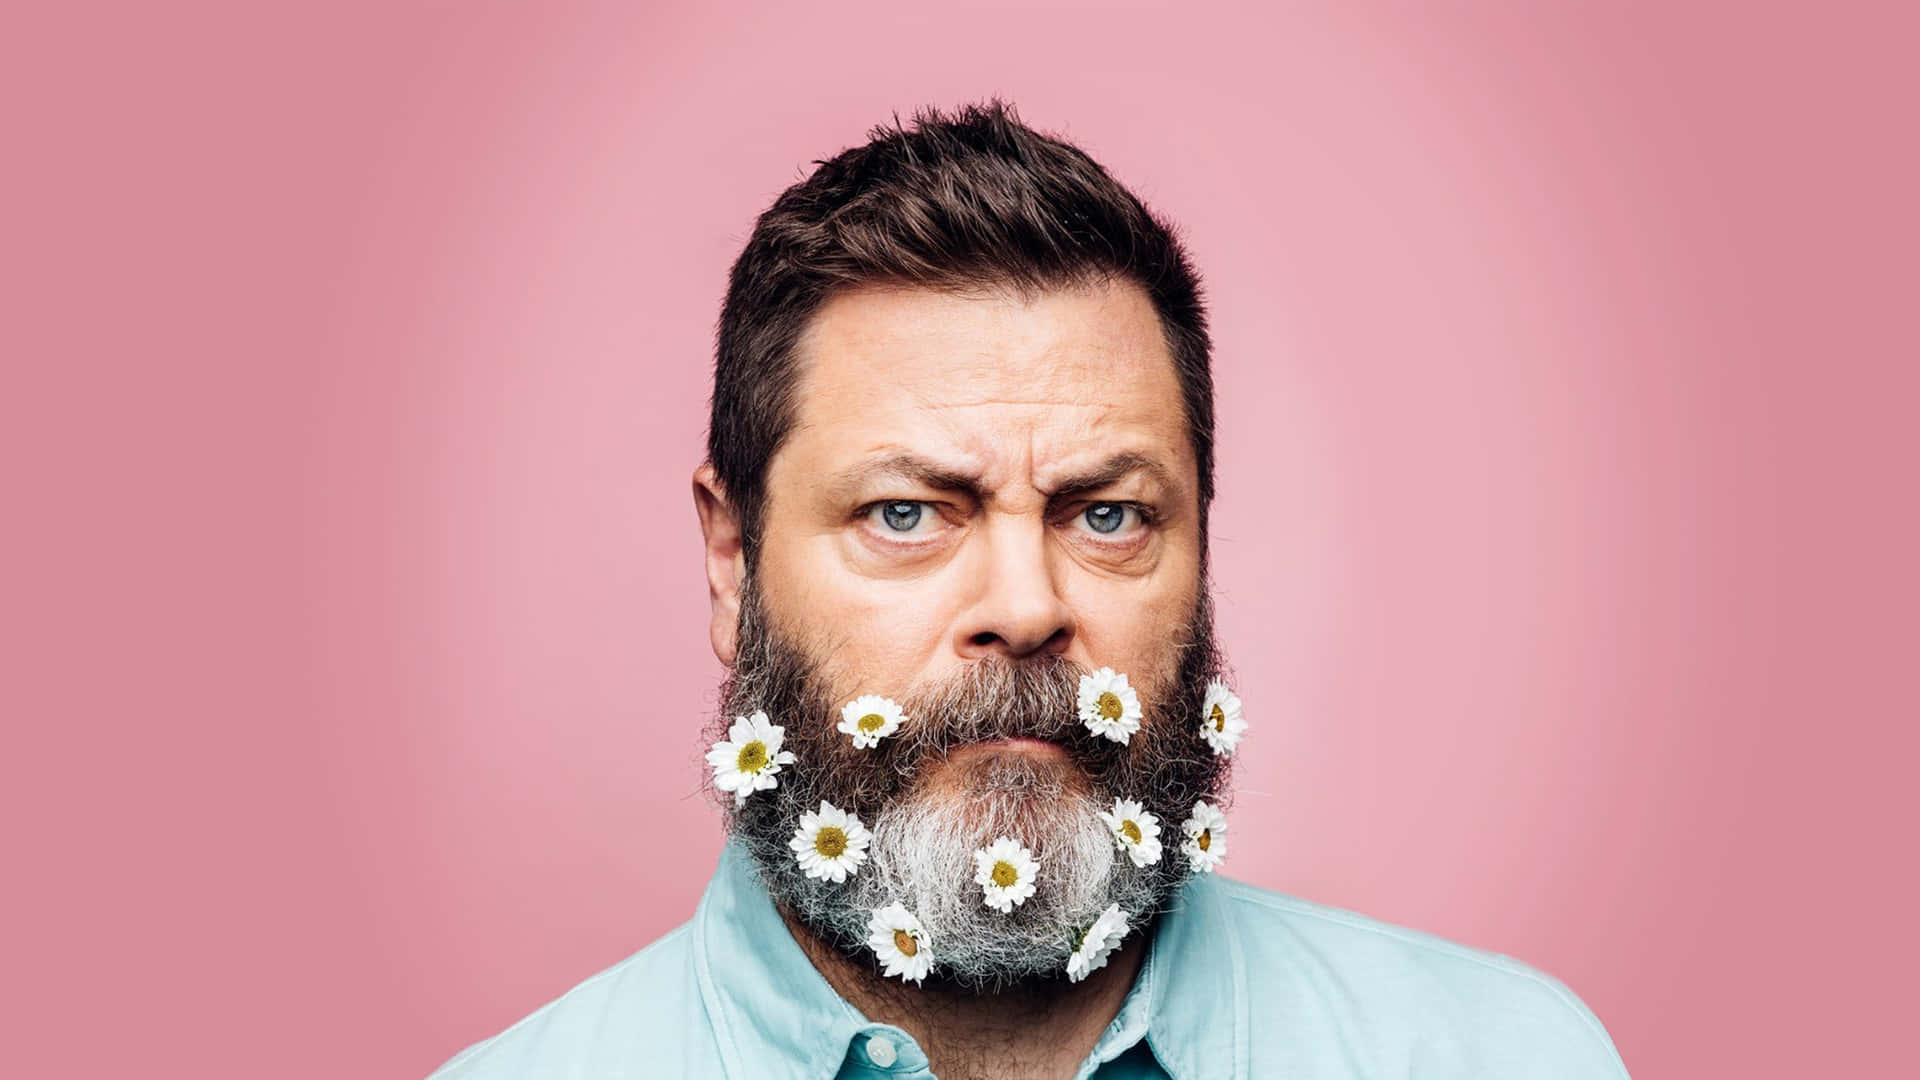 Nick Offerman - Actor And Actor